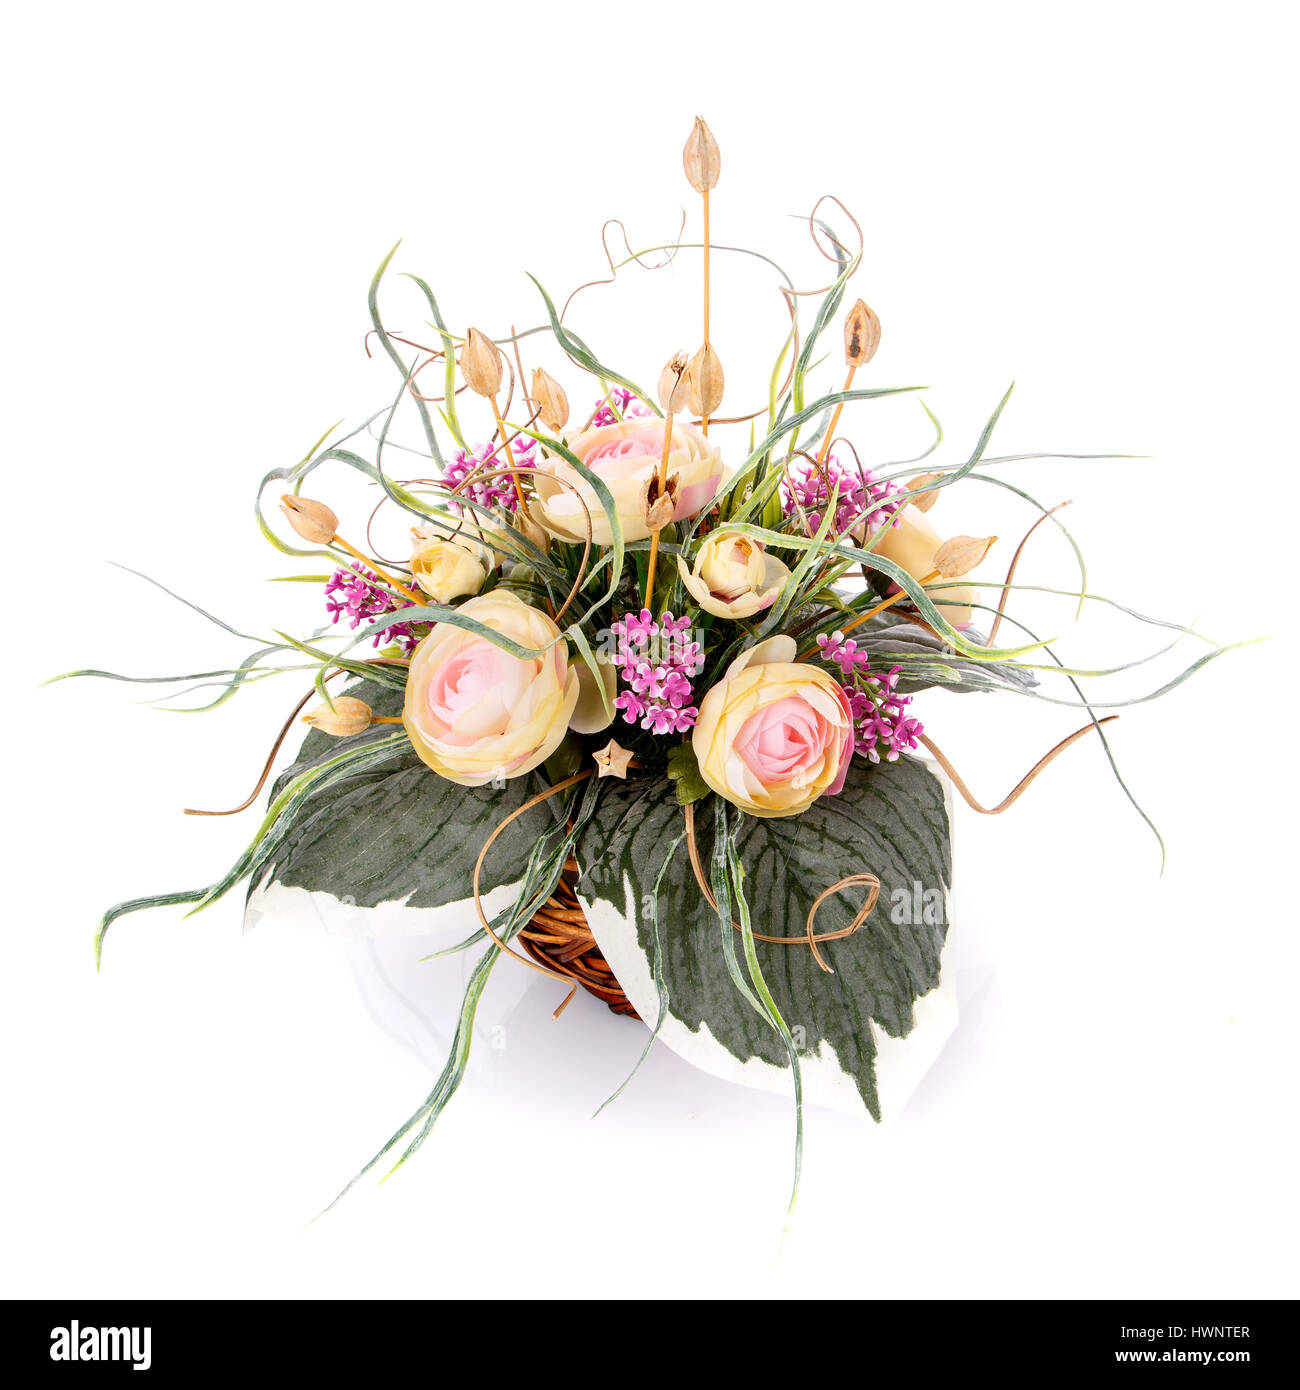 floral decoration to decorate the home and family holidays greetings Stock Photo